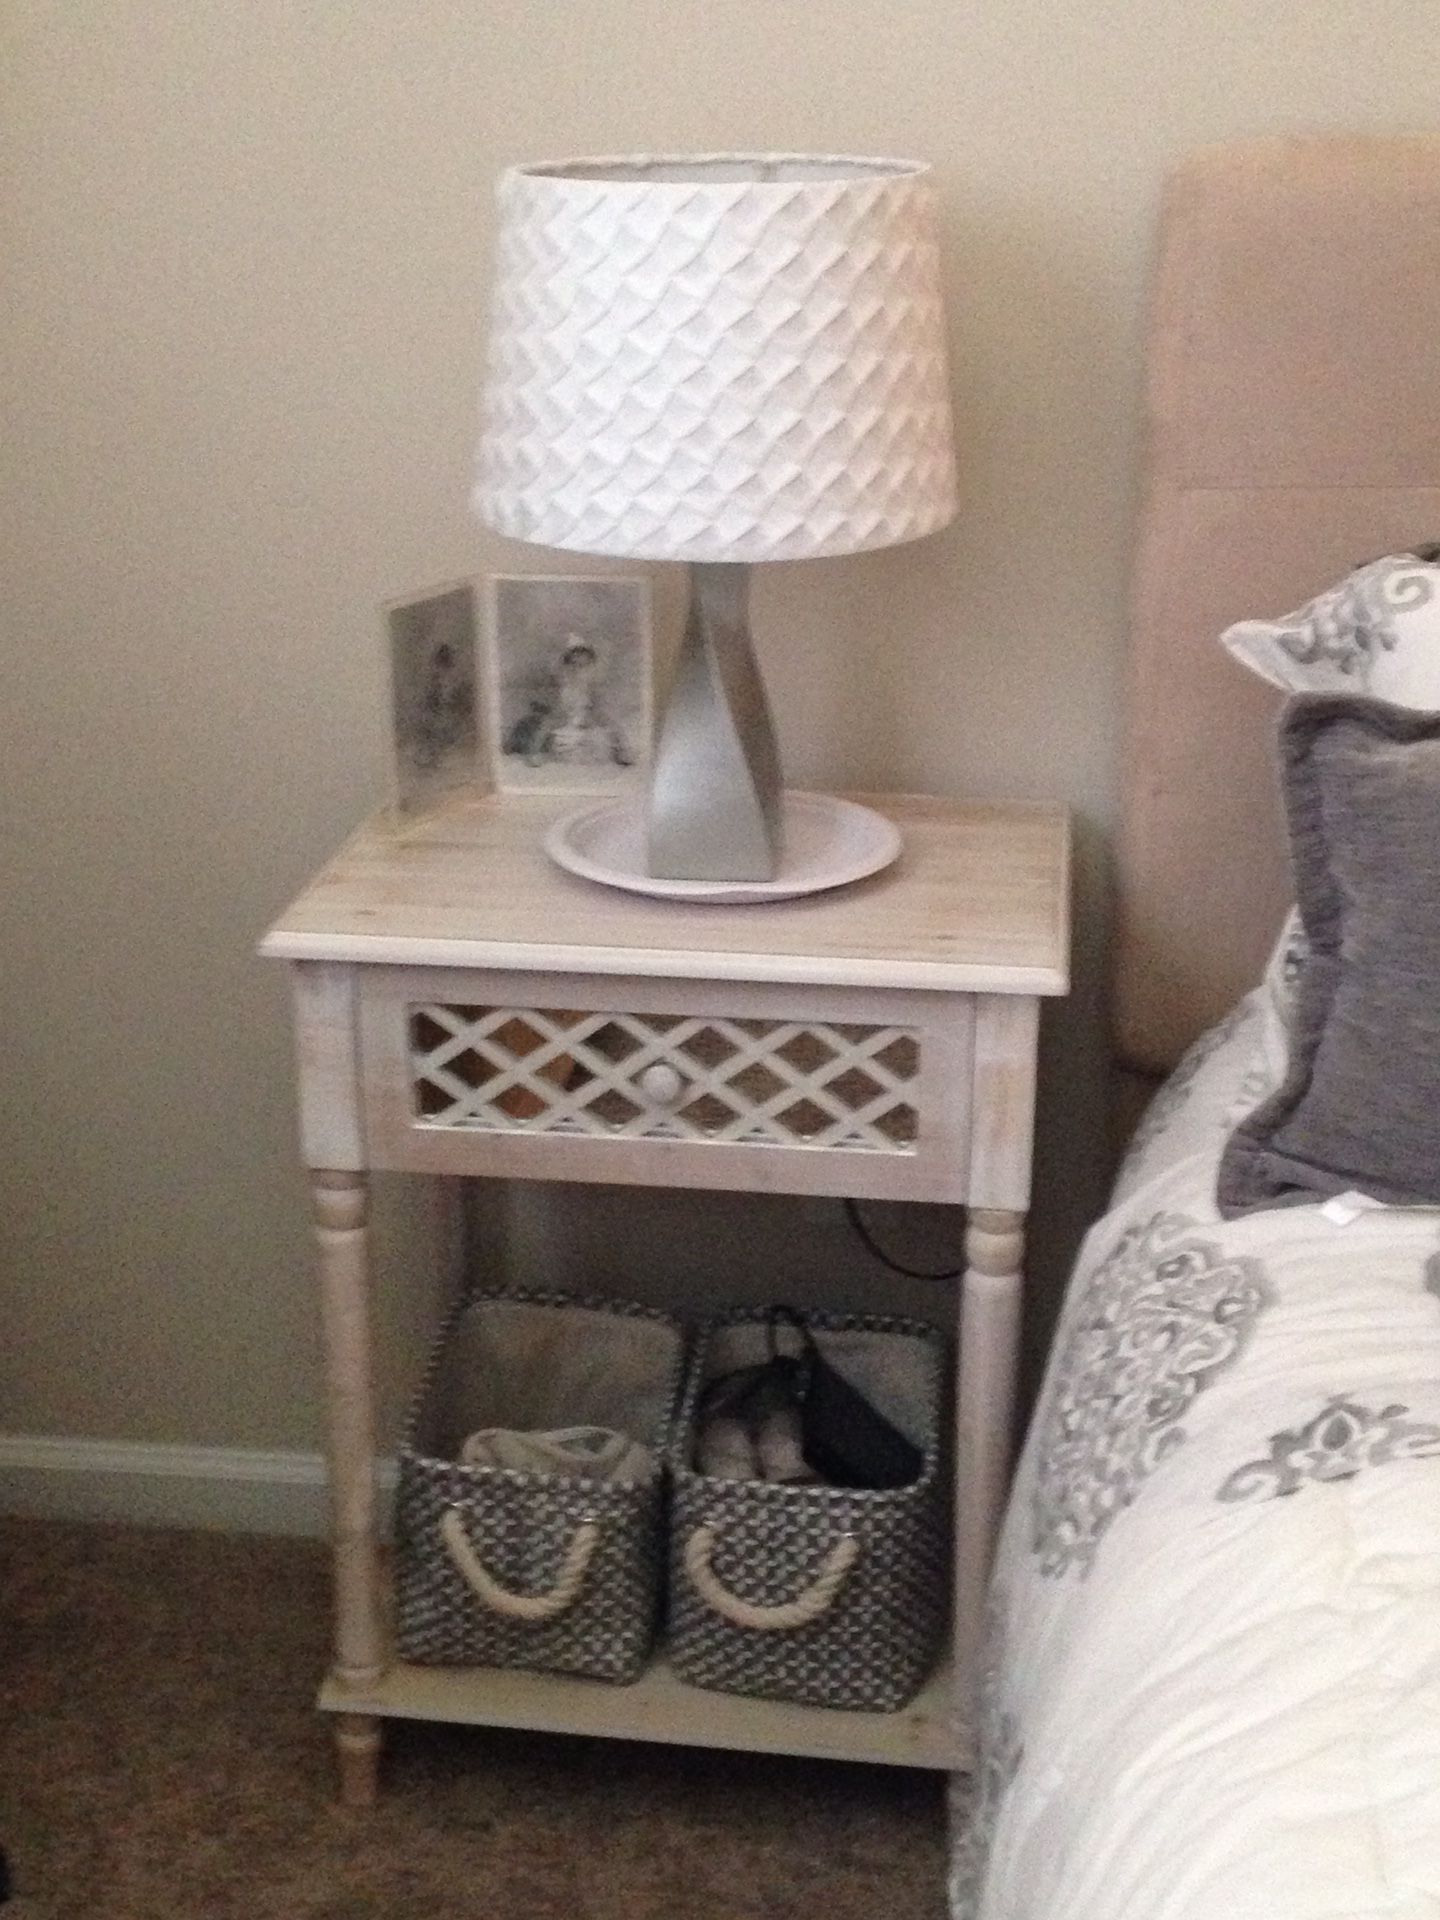 Mirror/lattice Small night stand, lamp, and baskets